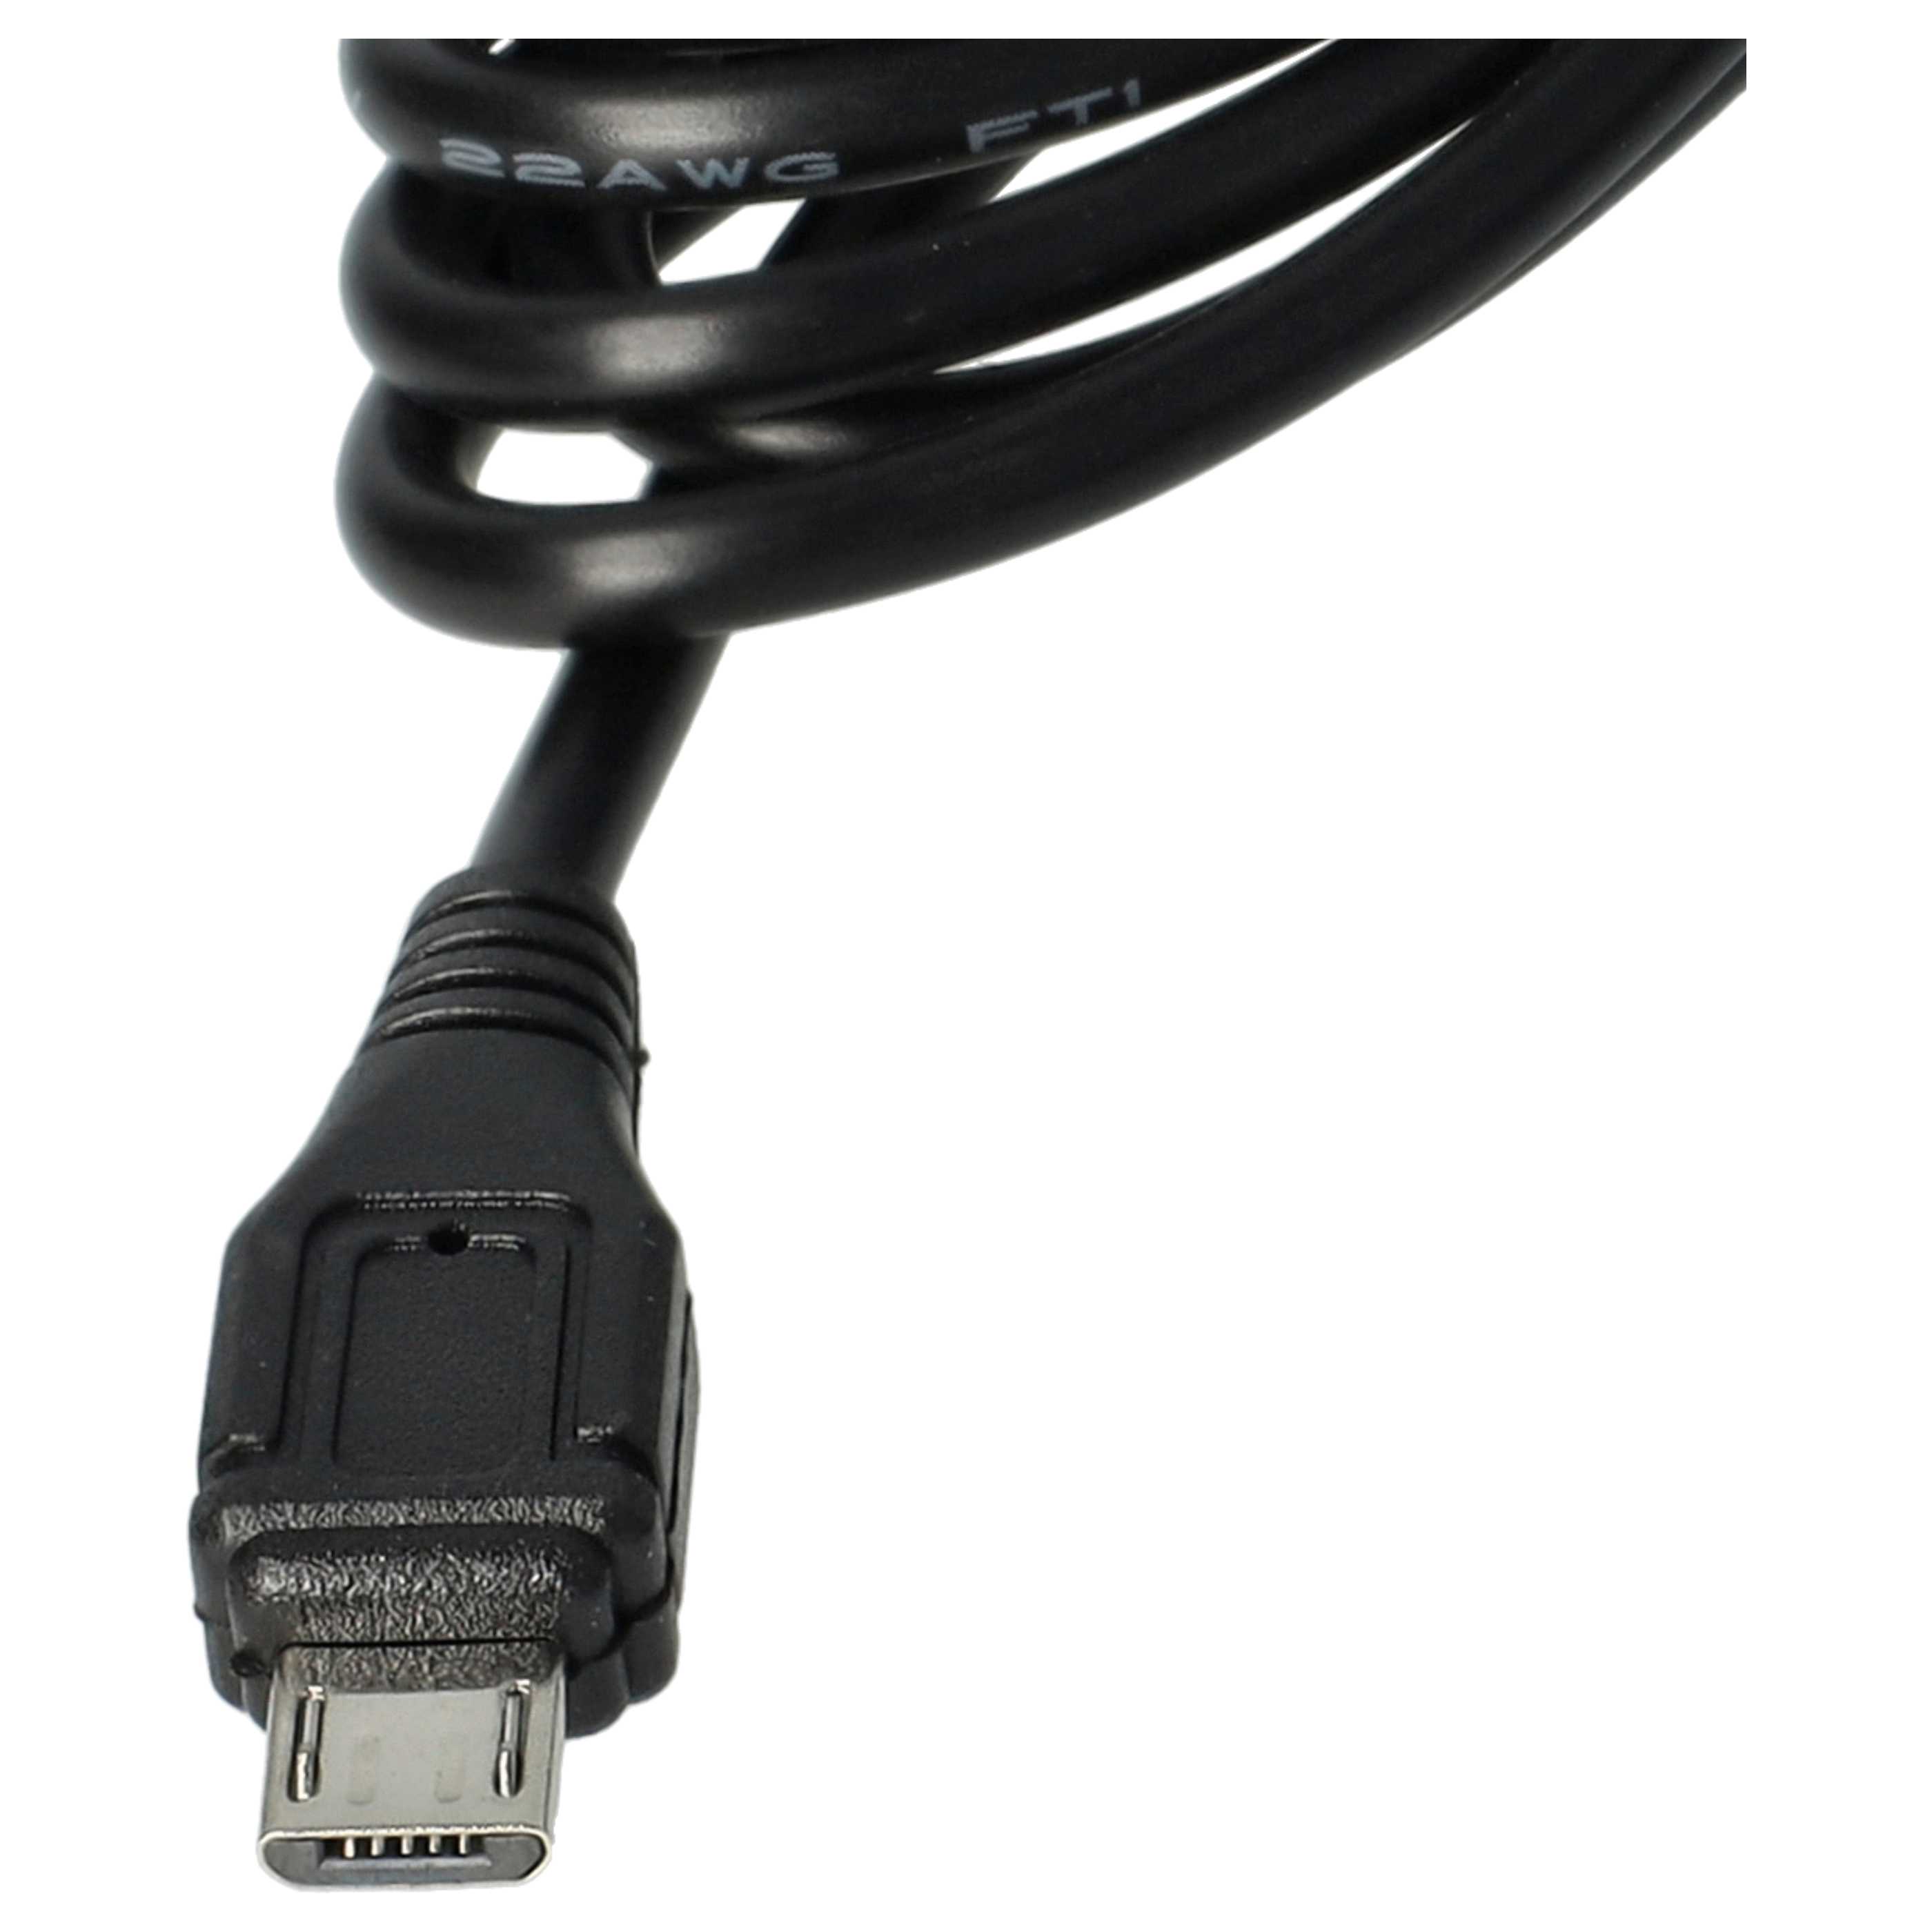 Micro-USB Car Charger Cable 2.0 A suitable for C150 Bea-fonDevices like Smartphone, GPS, Sat Navs